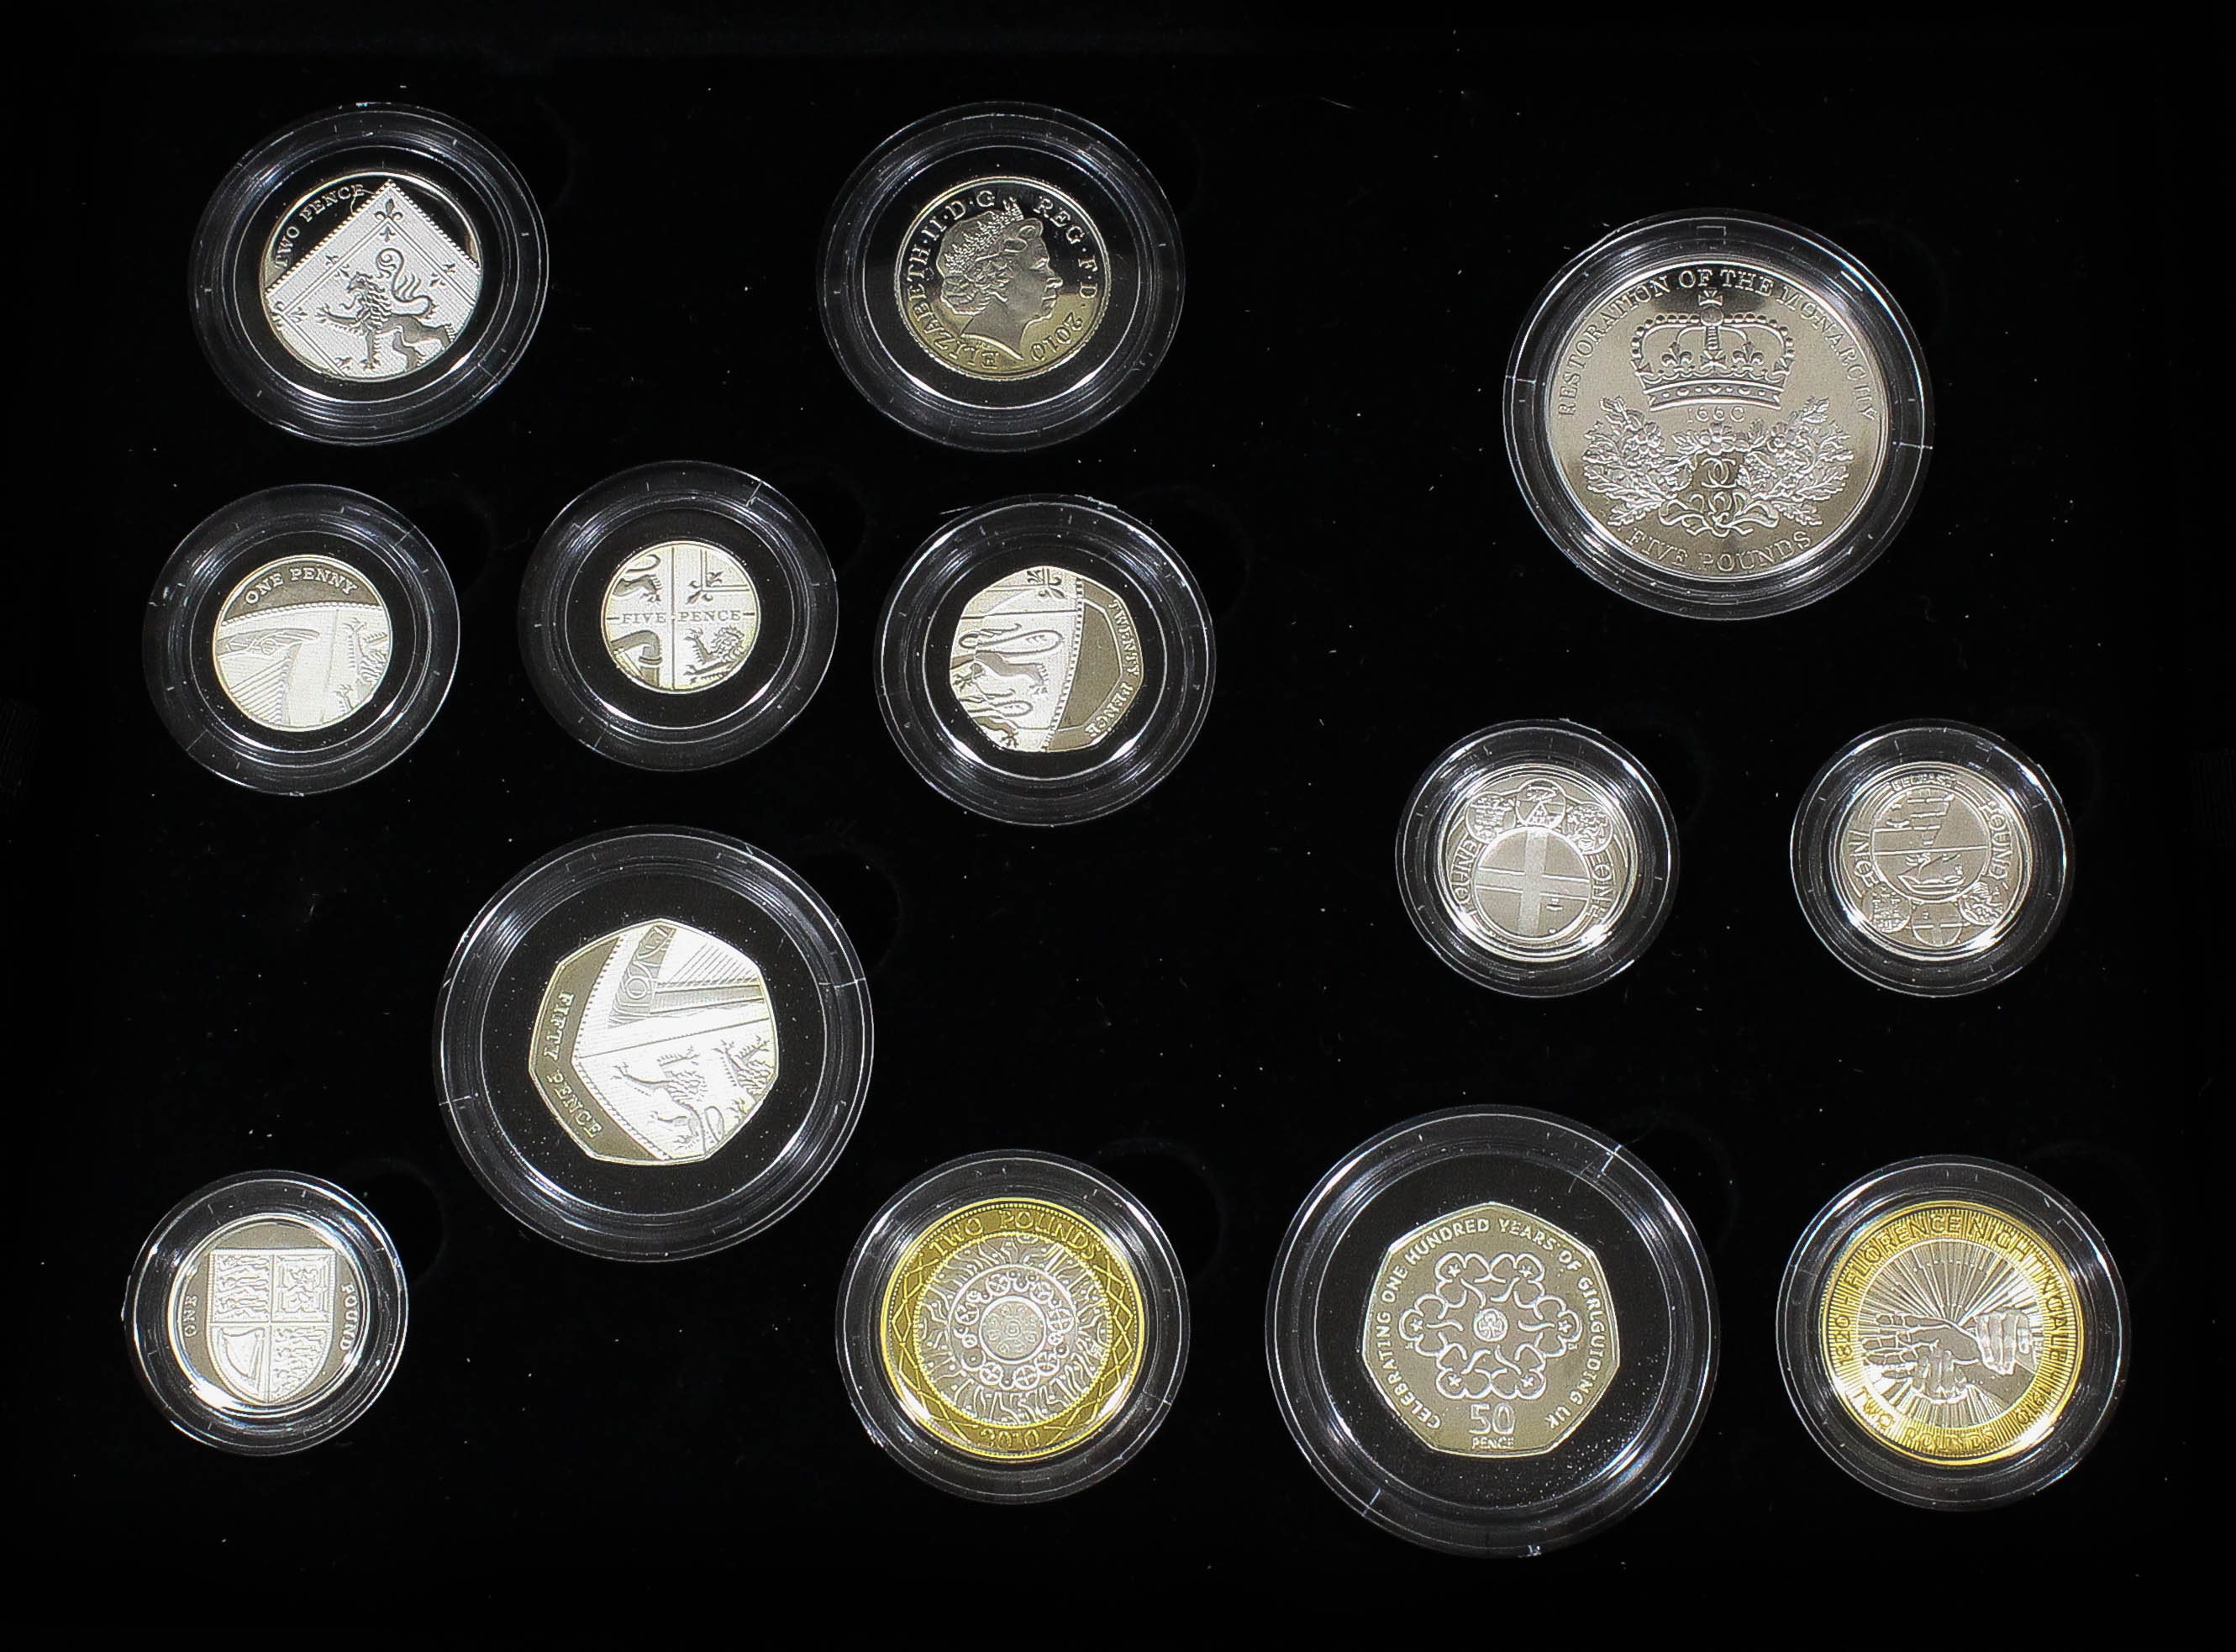 An Elizabeth II 2010 silver thirteen coin set (No. 67 of edition of 3500), in Royal Mint black